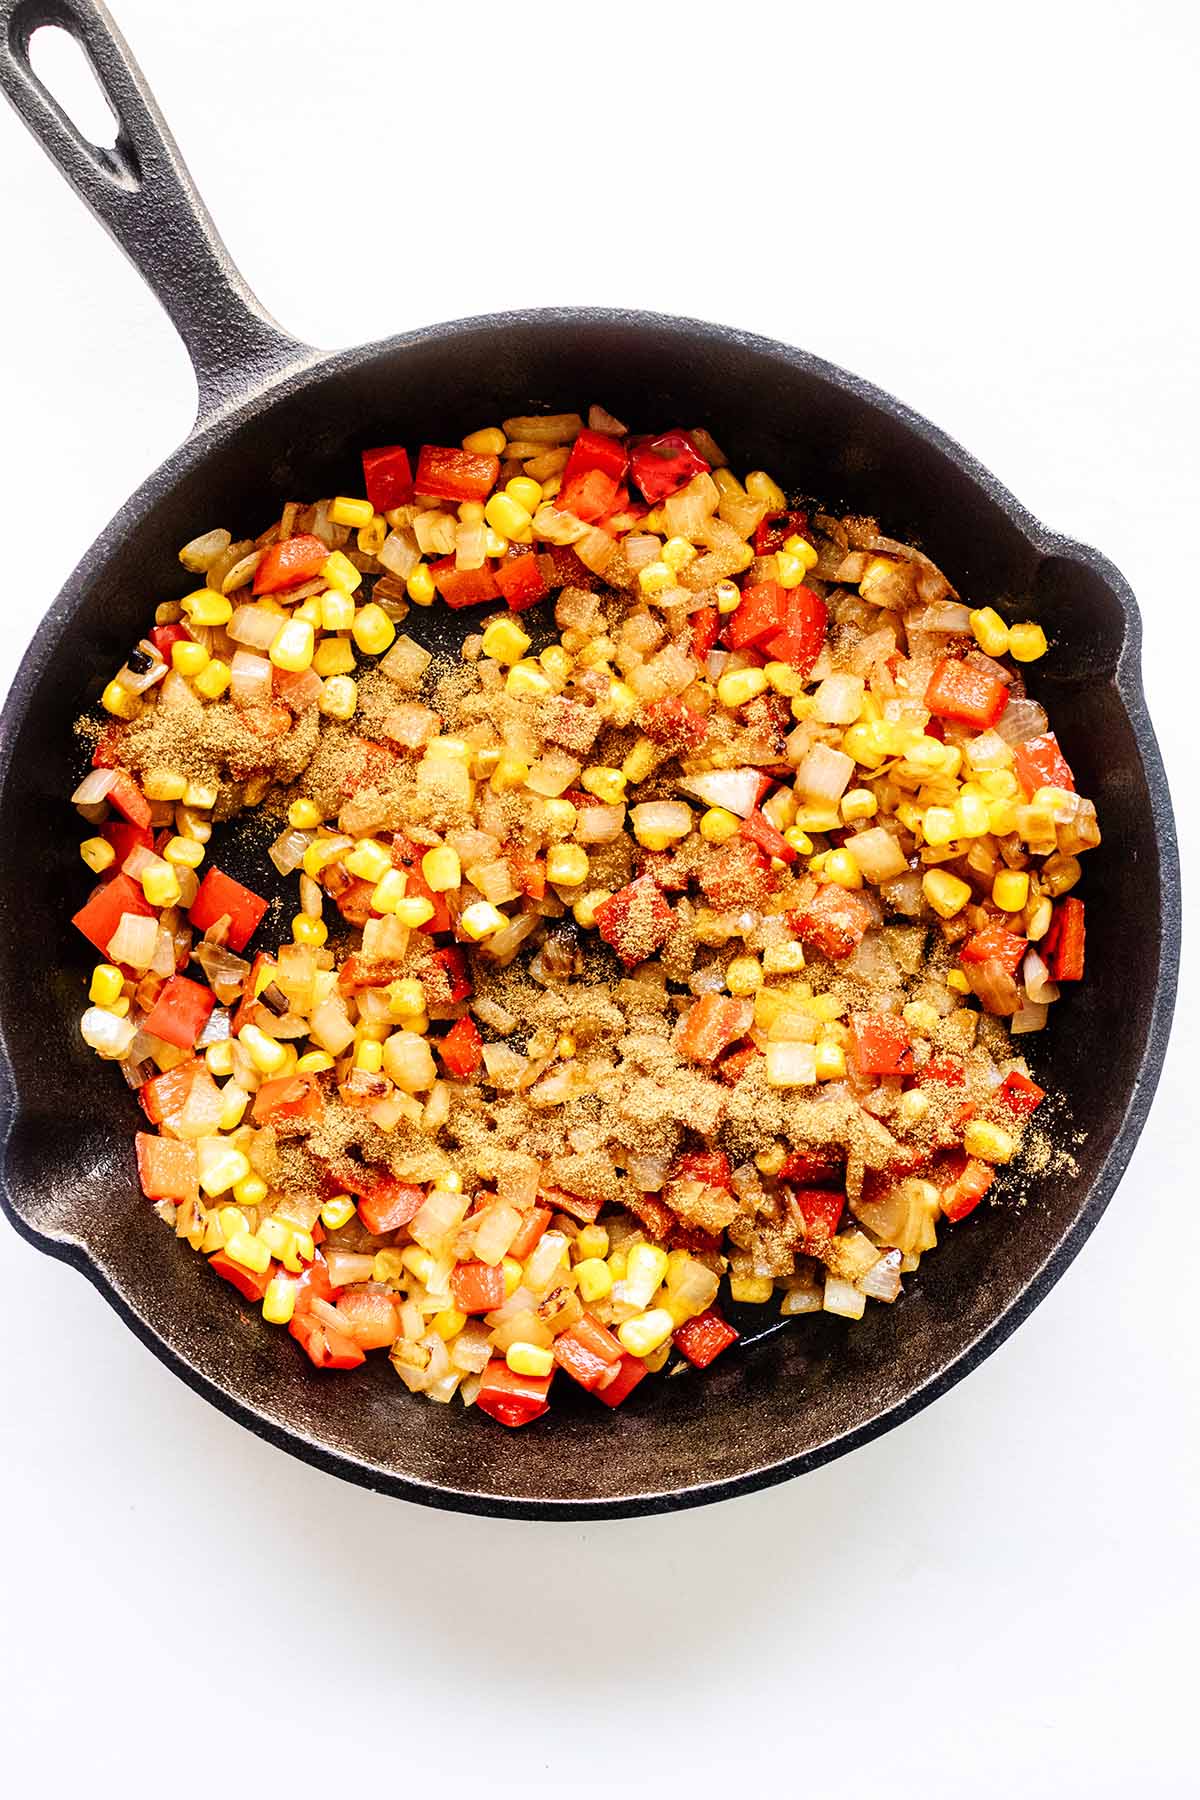 Cooked chopped onion, red bell pepper, corn, and ground cumin in a cast iron skillet.